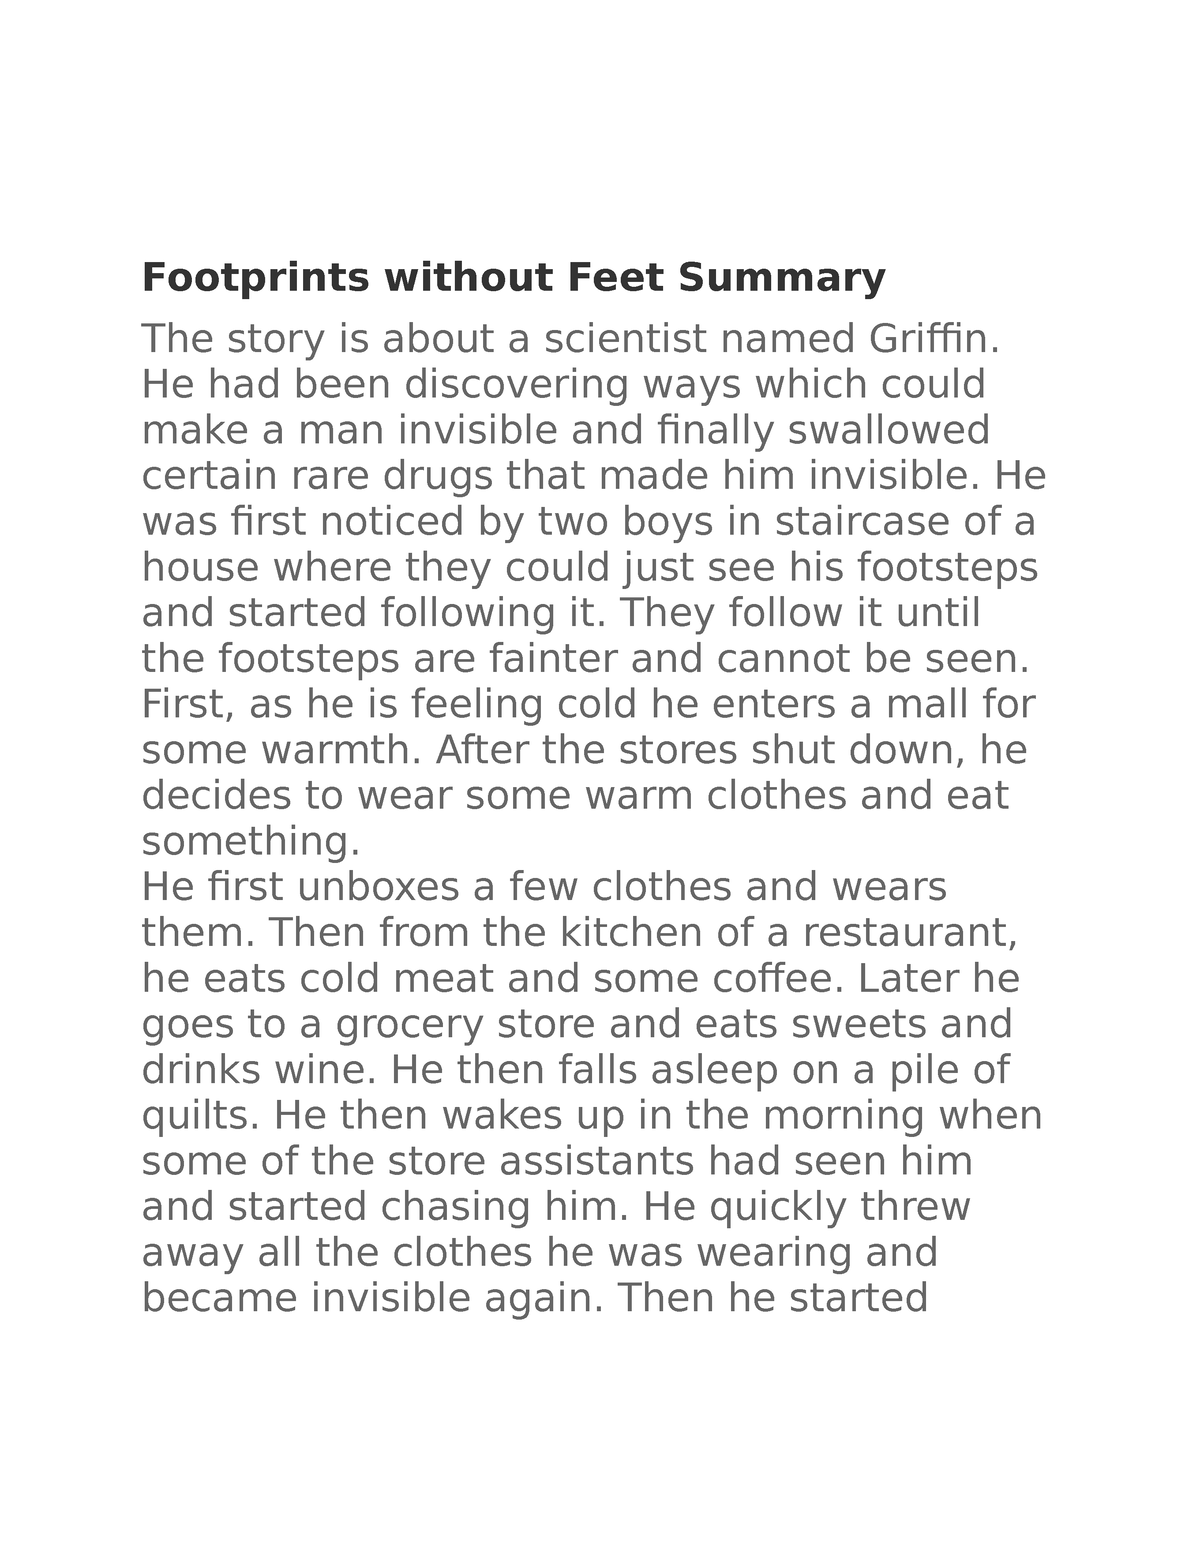 cbse-class-x-footprints-without-foot-summary-footprints-without-feet-summary-the-story-is